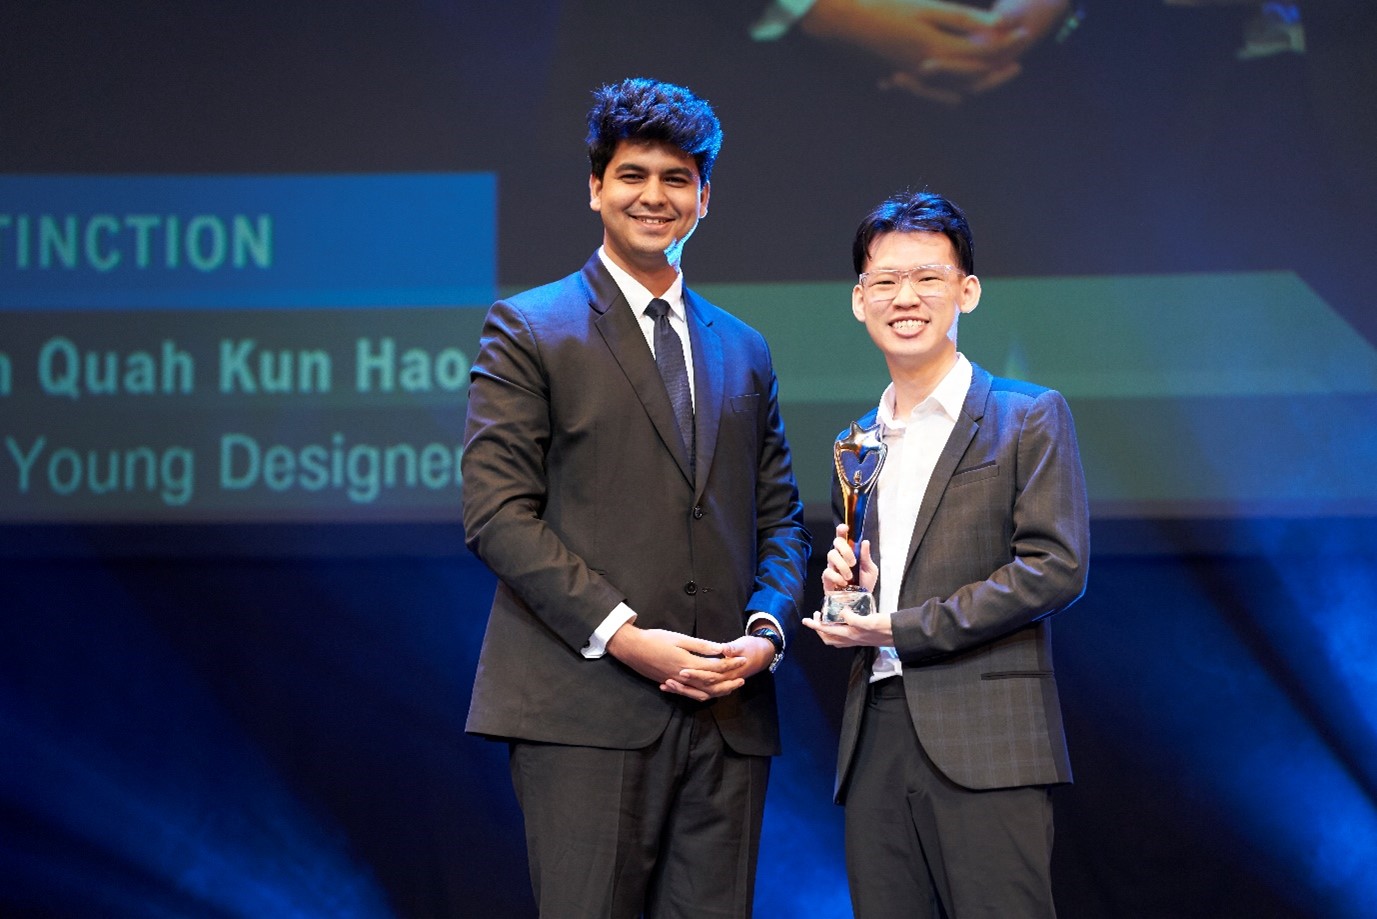 Ryan receiving the Distinction award for the Competitions (General) category at NAA 2023. Beside him is the award presenter, Karthik Vyas who received the same award the year before.